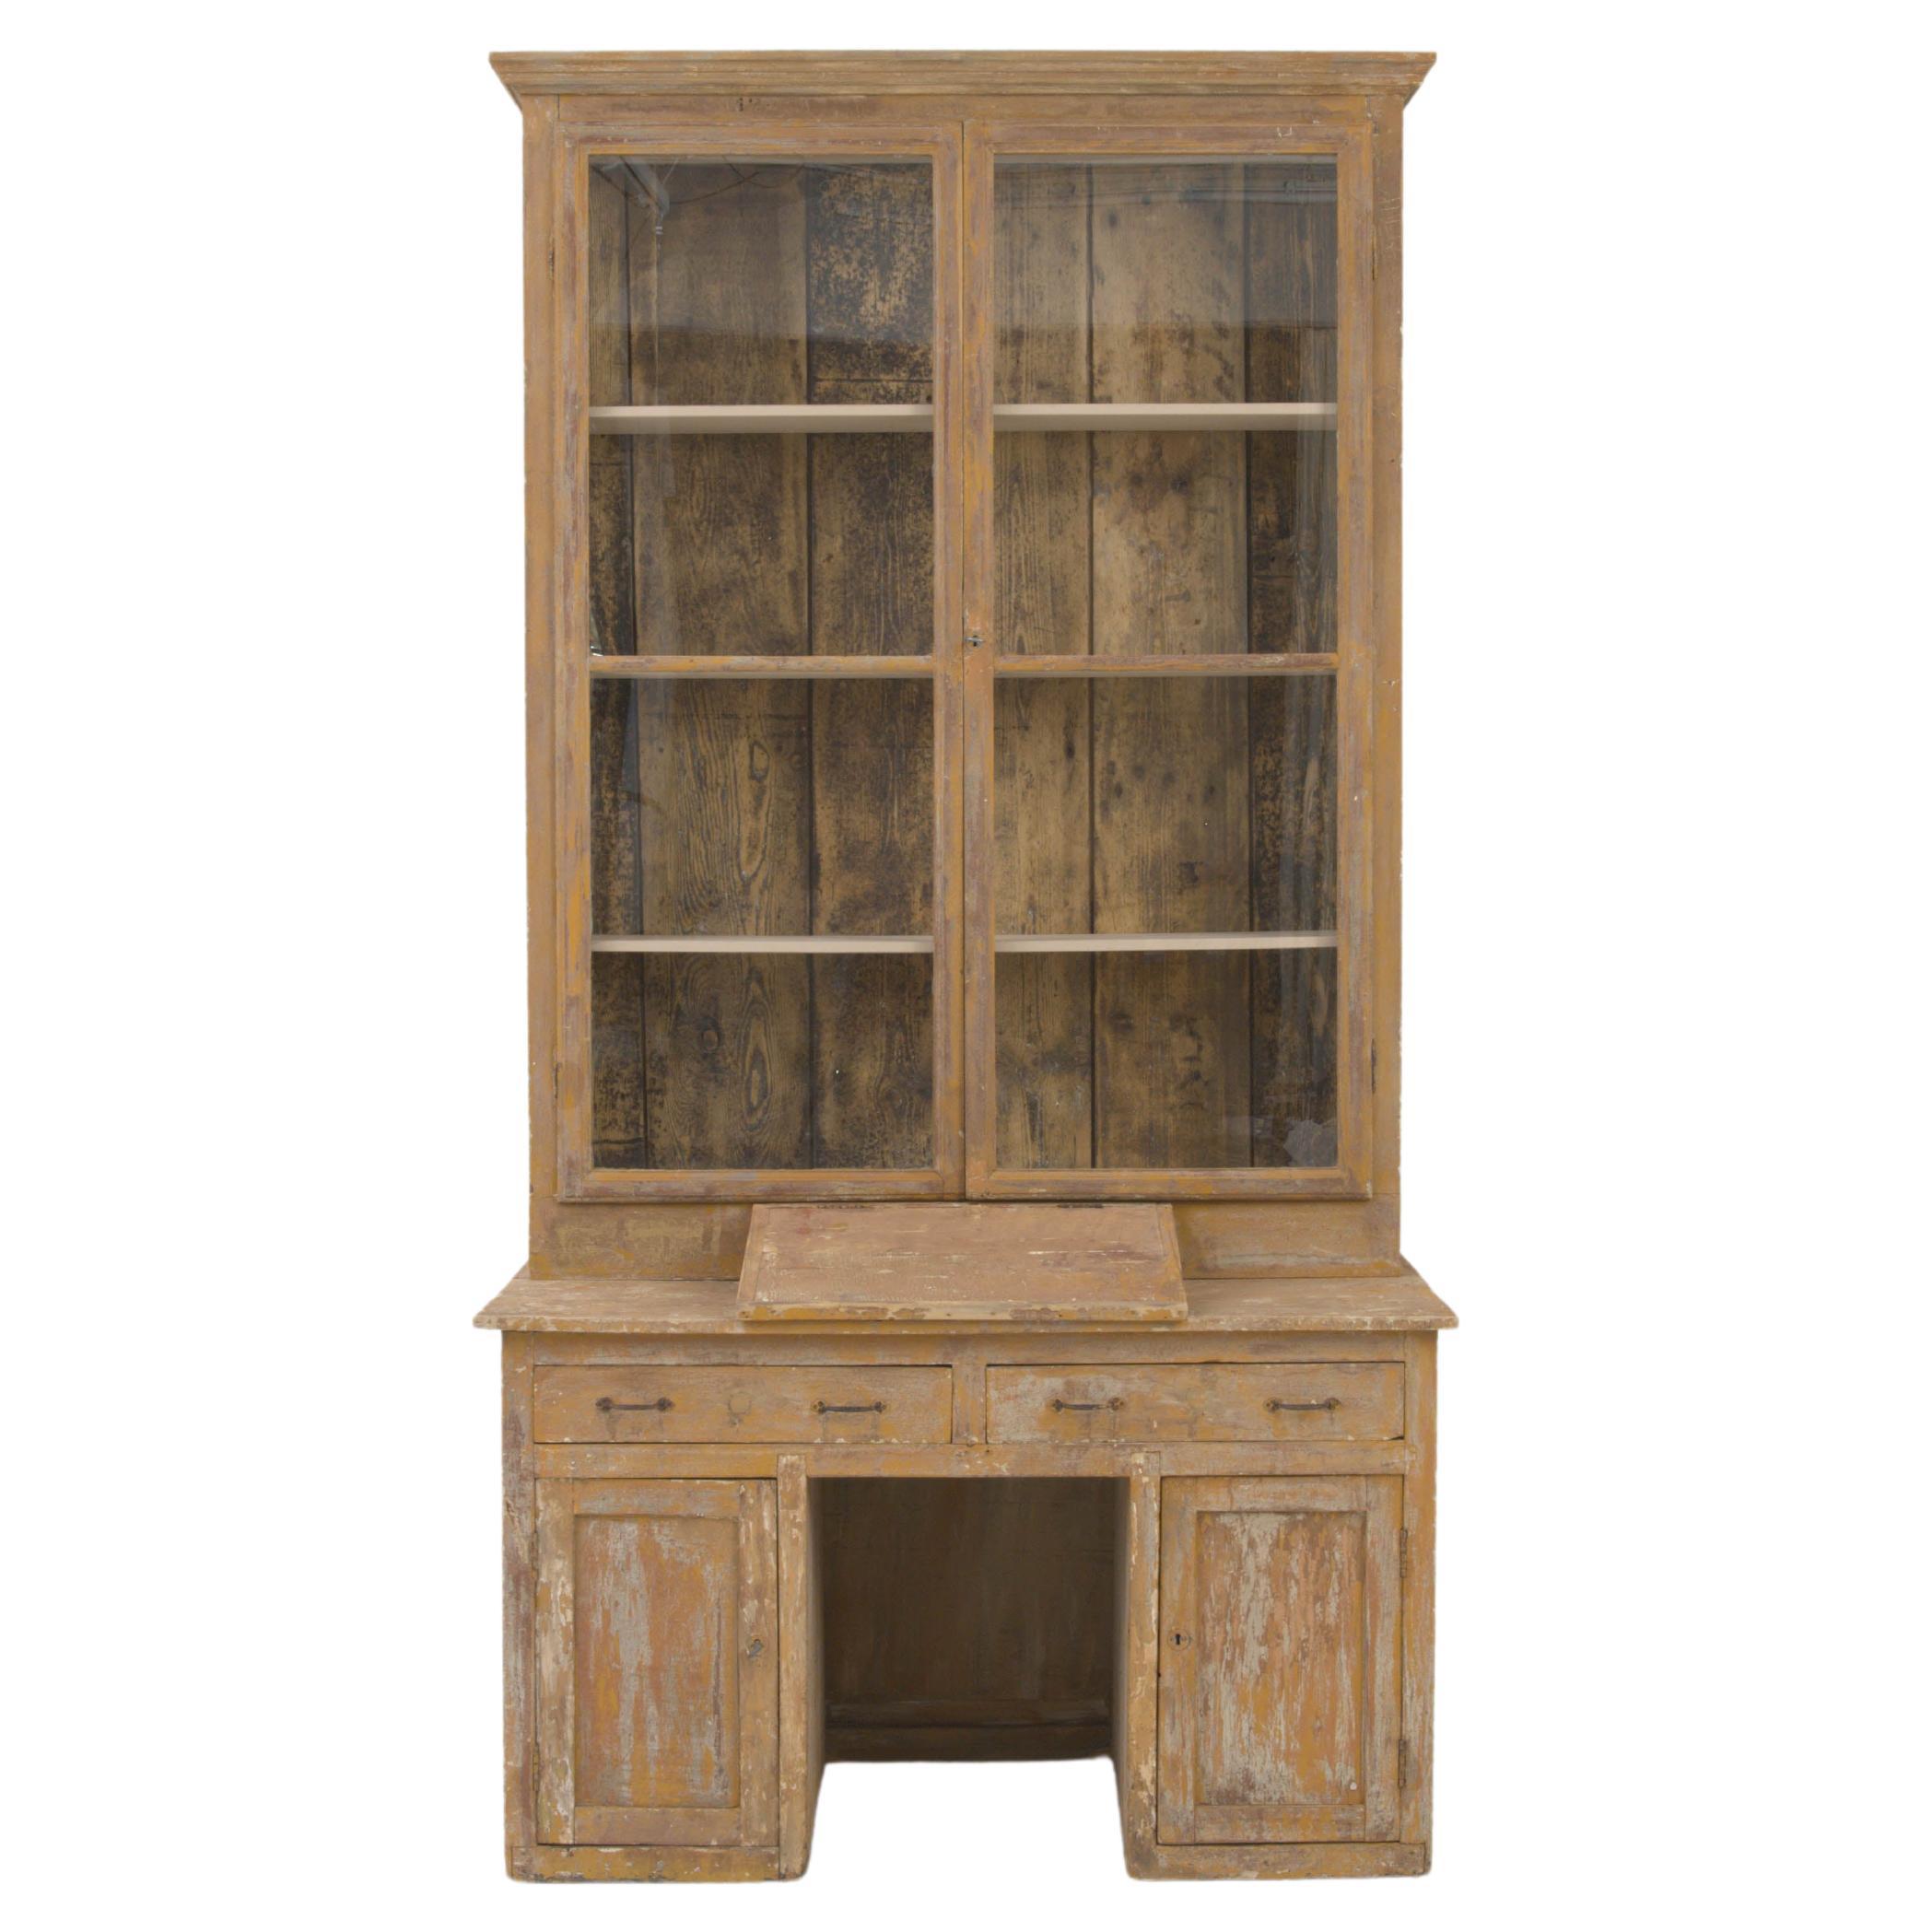 19th Century French Wooden Vitrine For Sale